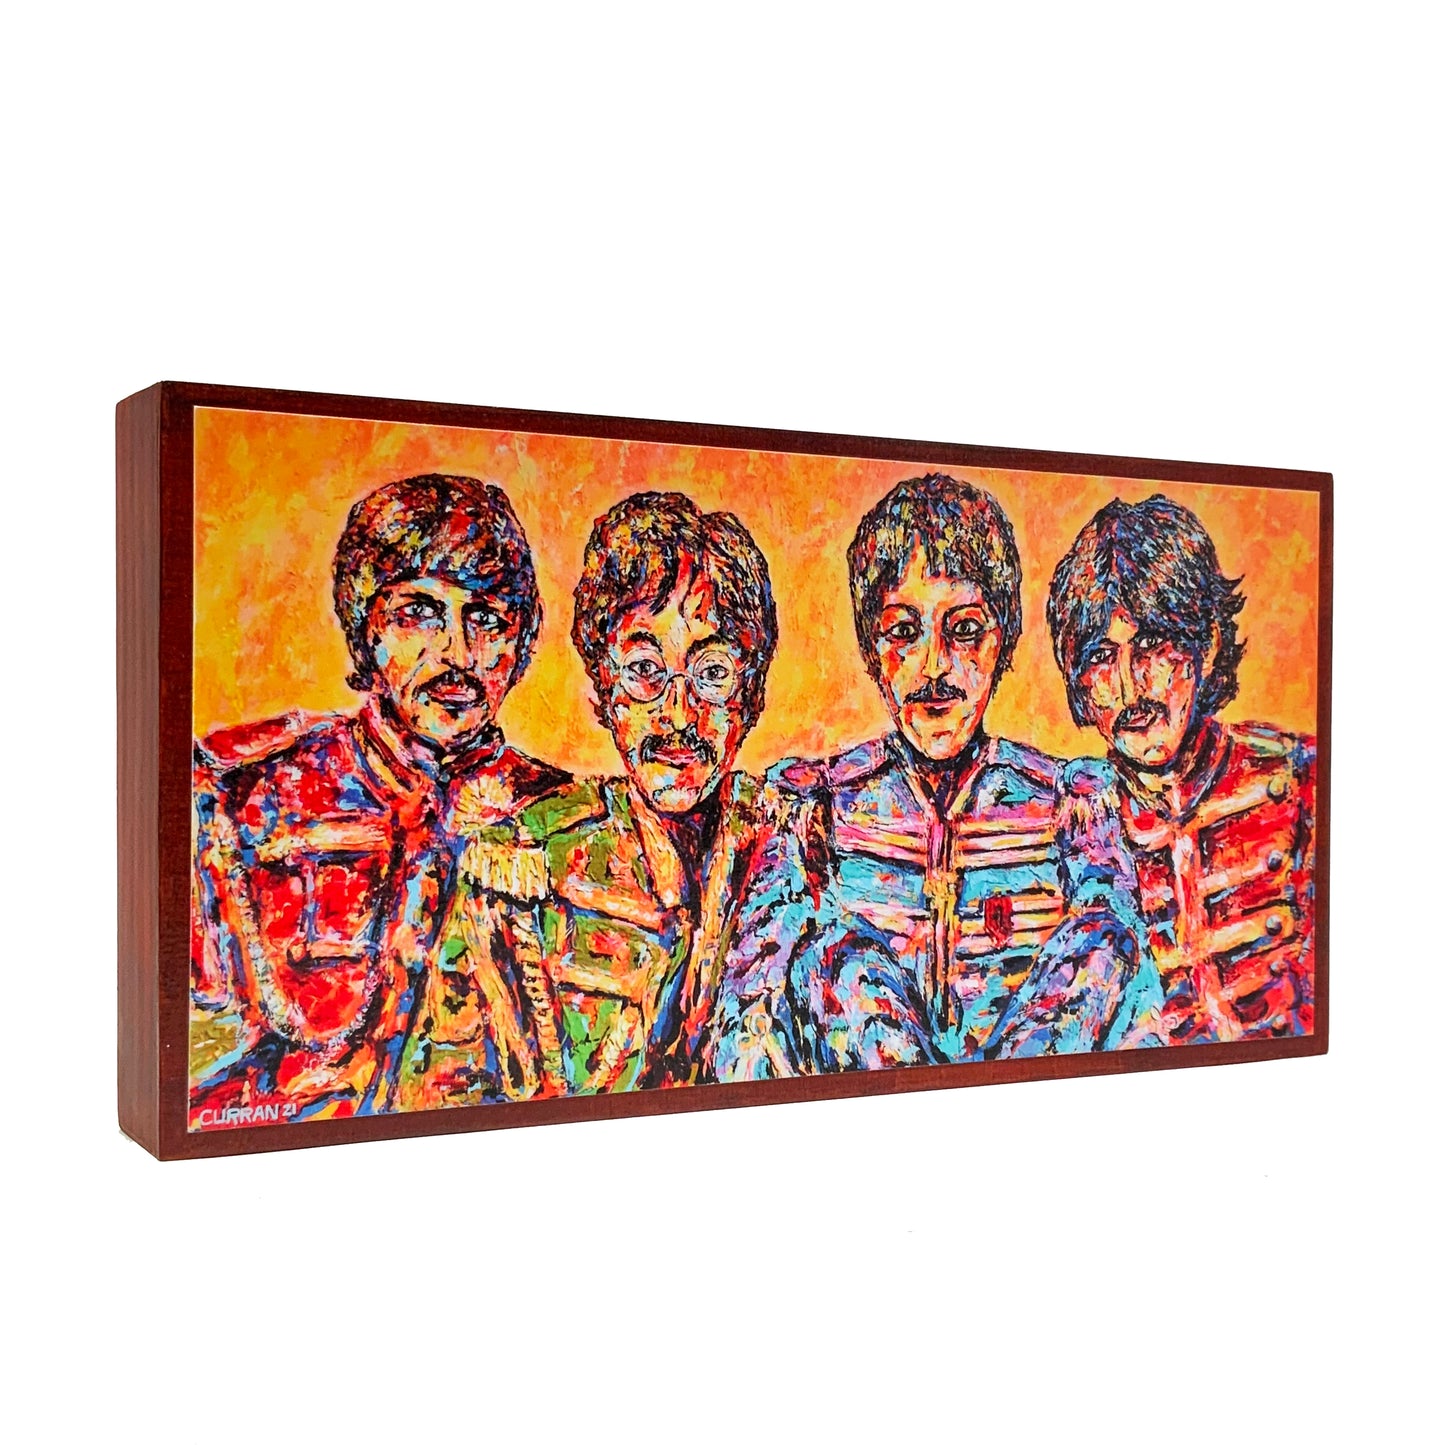 The Beatles on Wood Panel (Limited Edition) - Daniel Curran Art